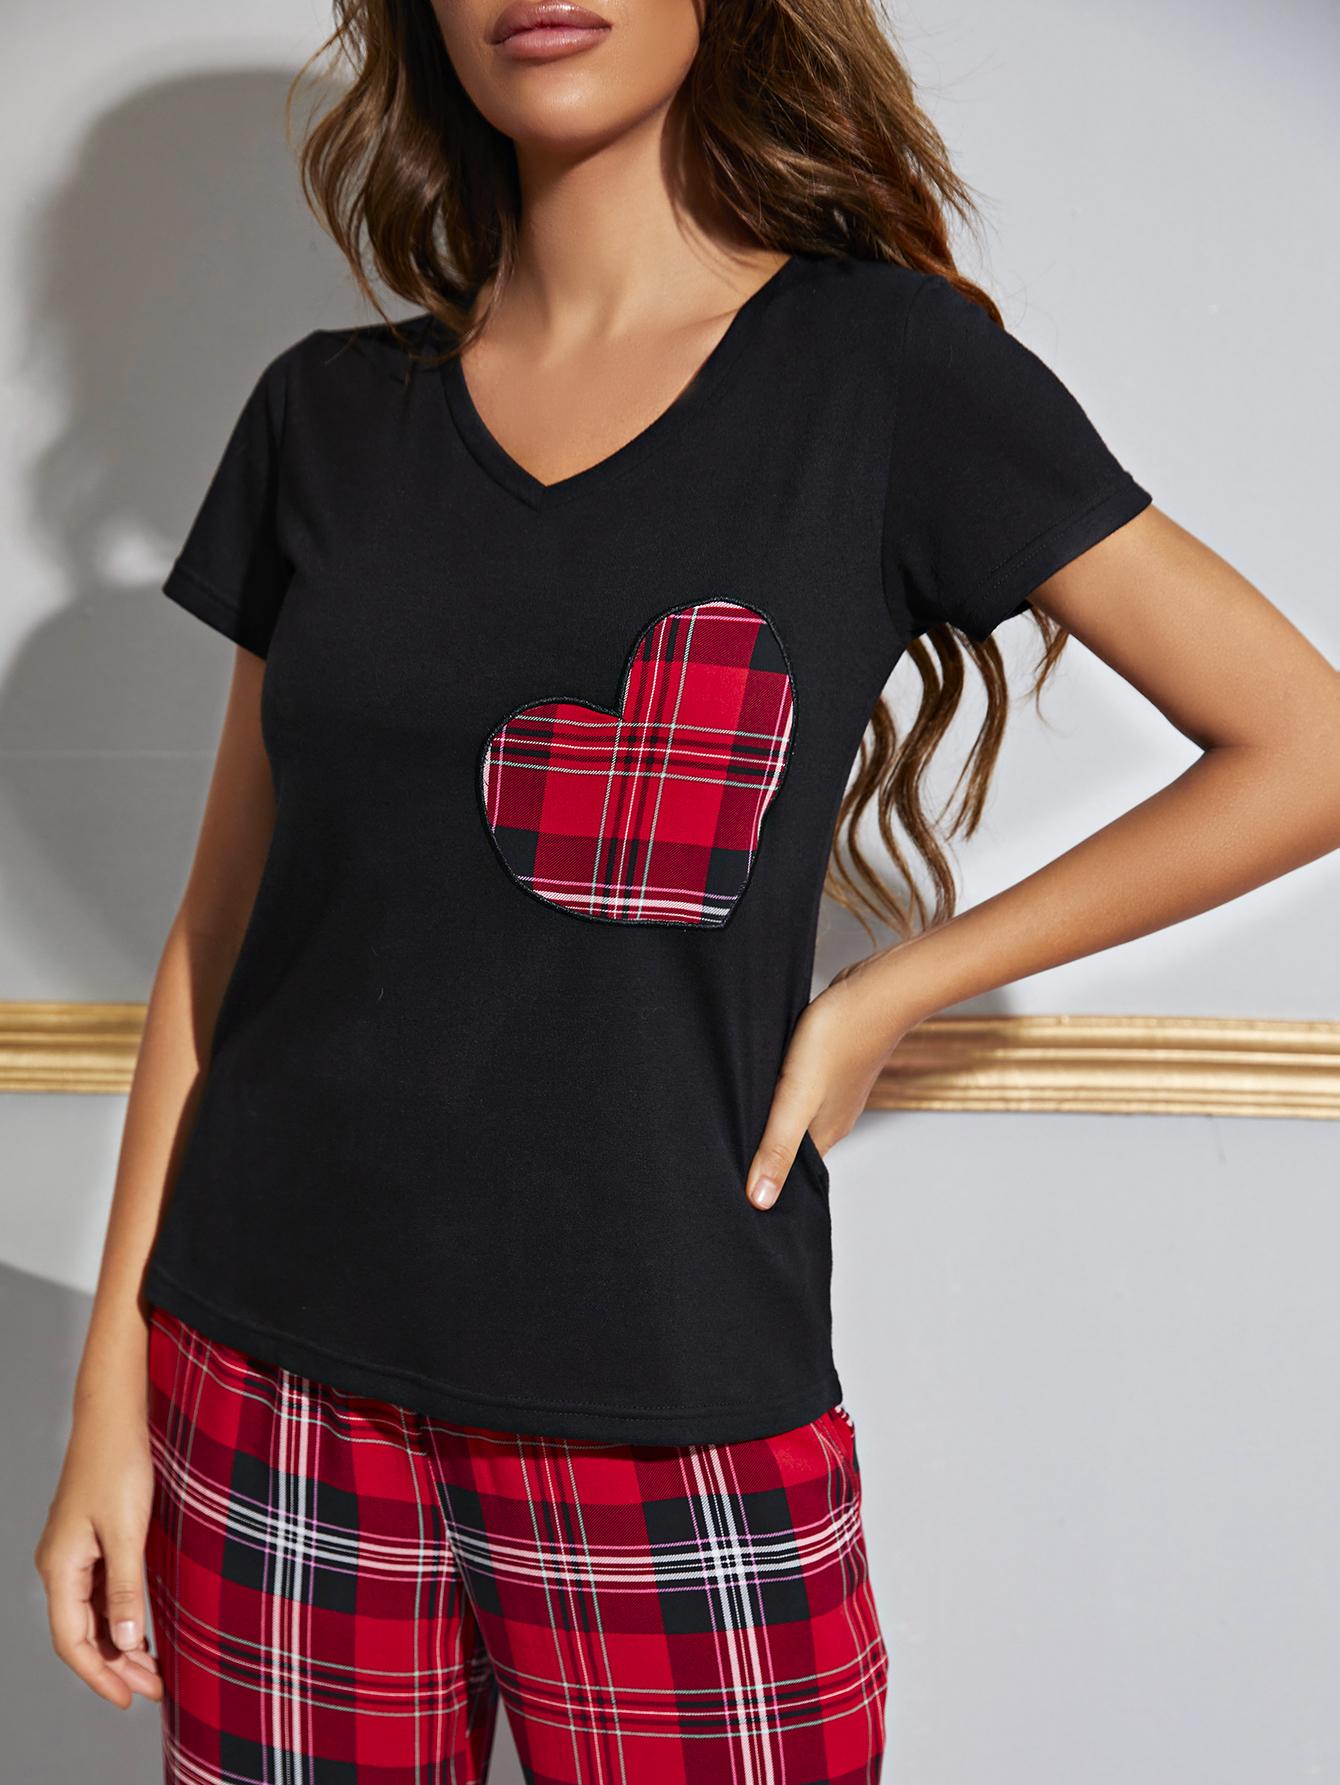 Women's Heart Graphic V-Neck Top and Plaid Pants Lounge Set